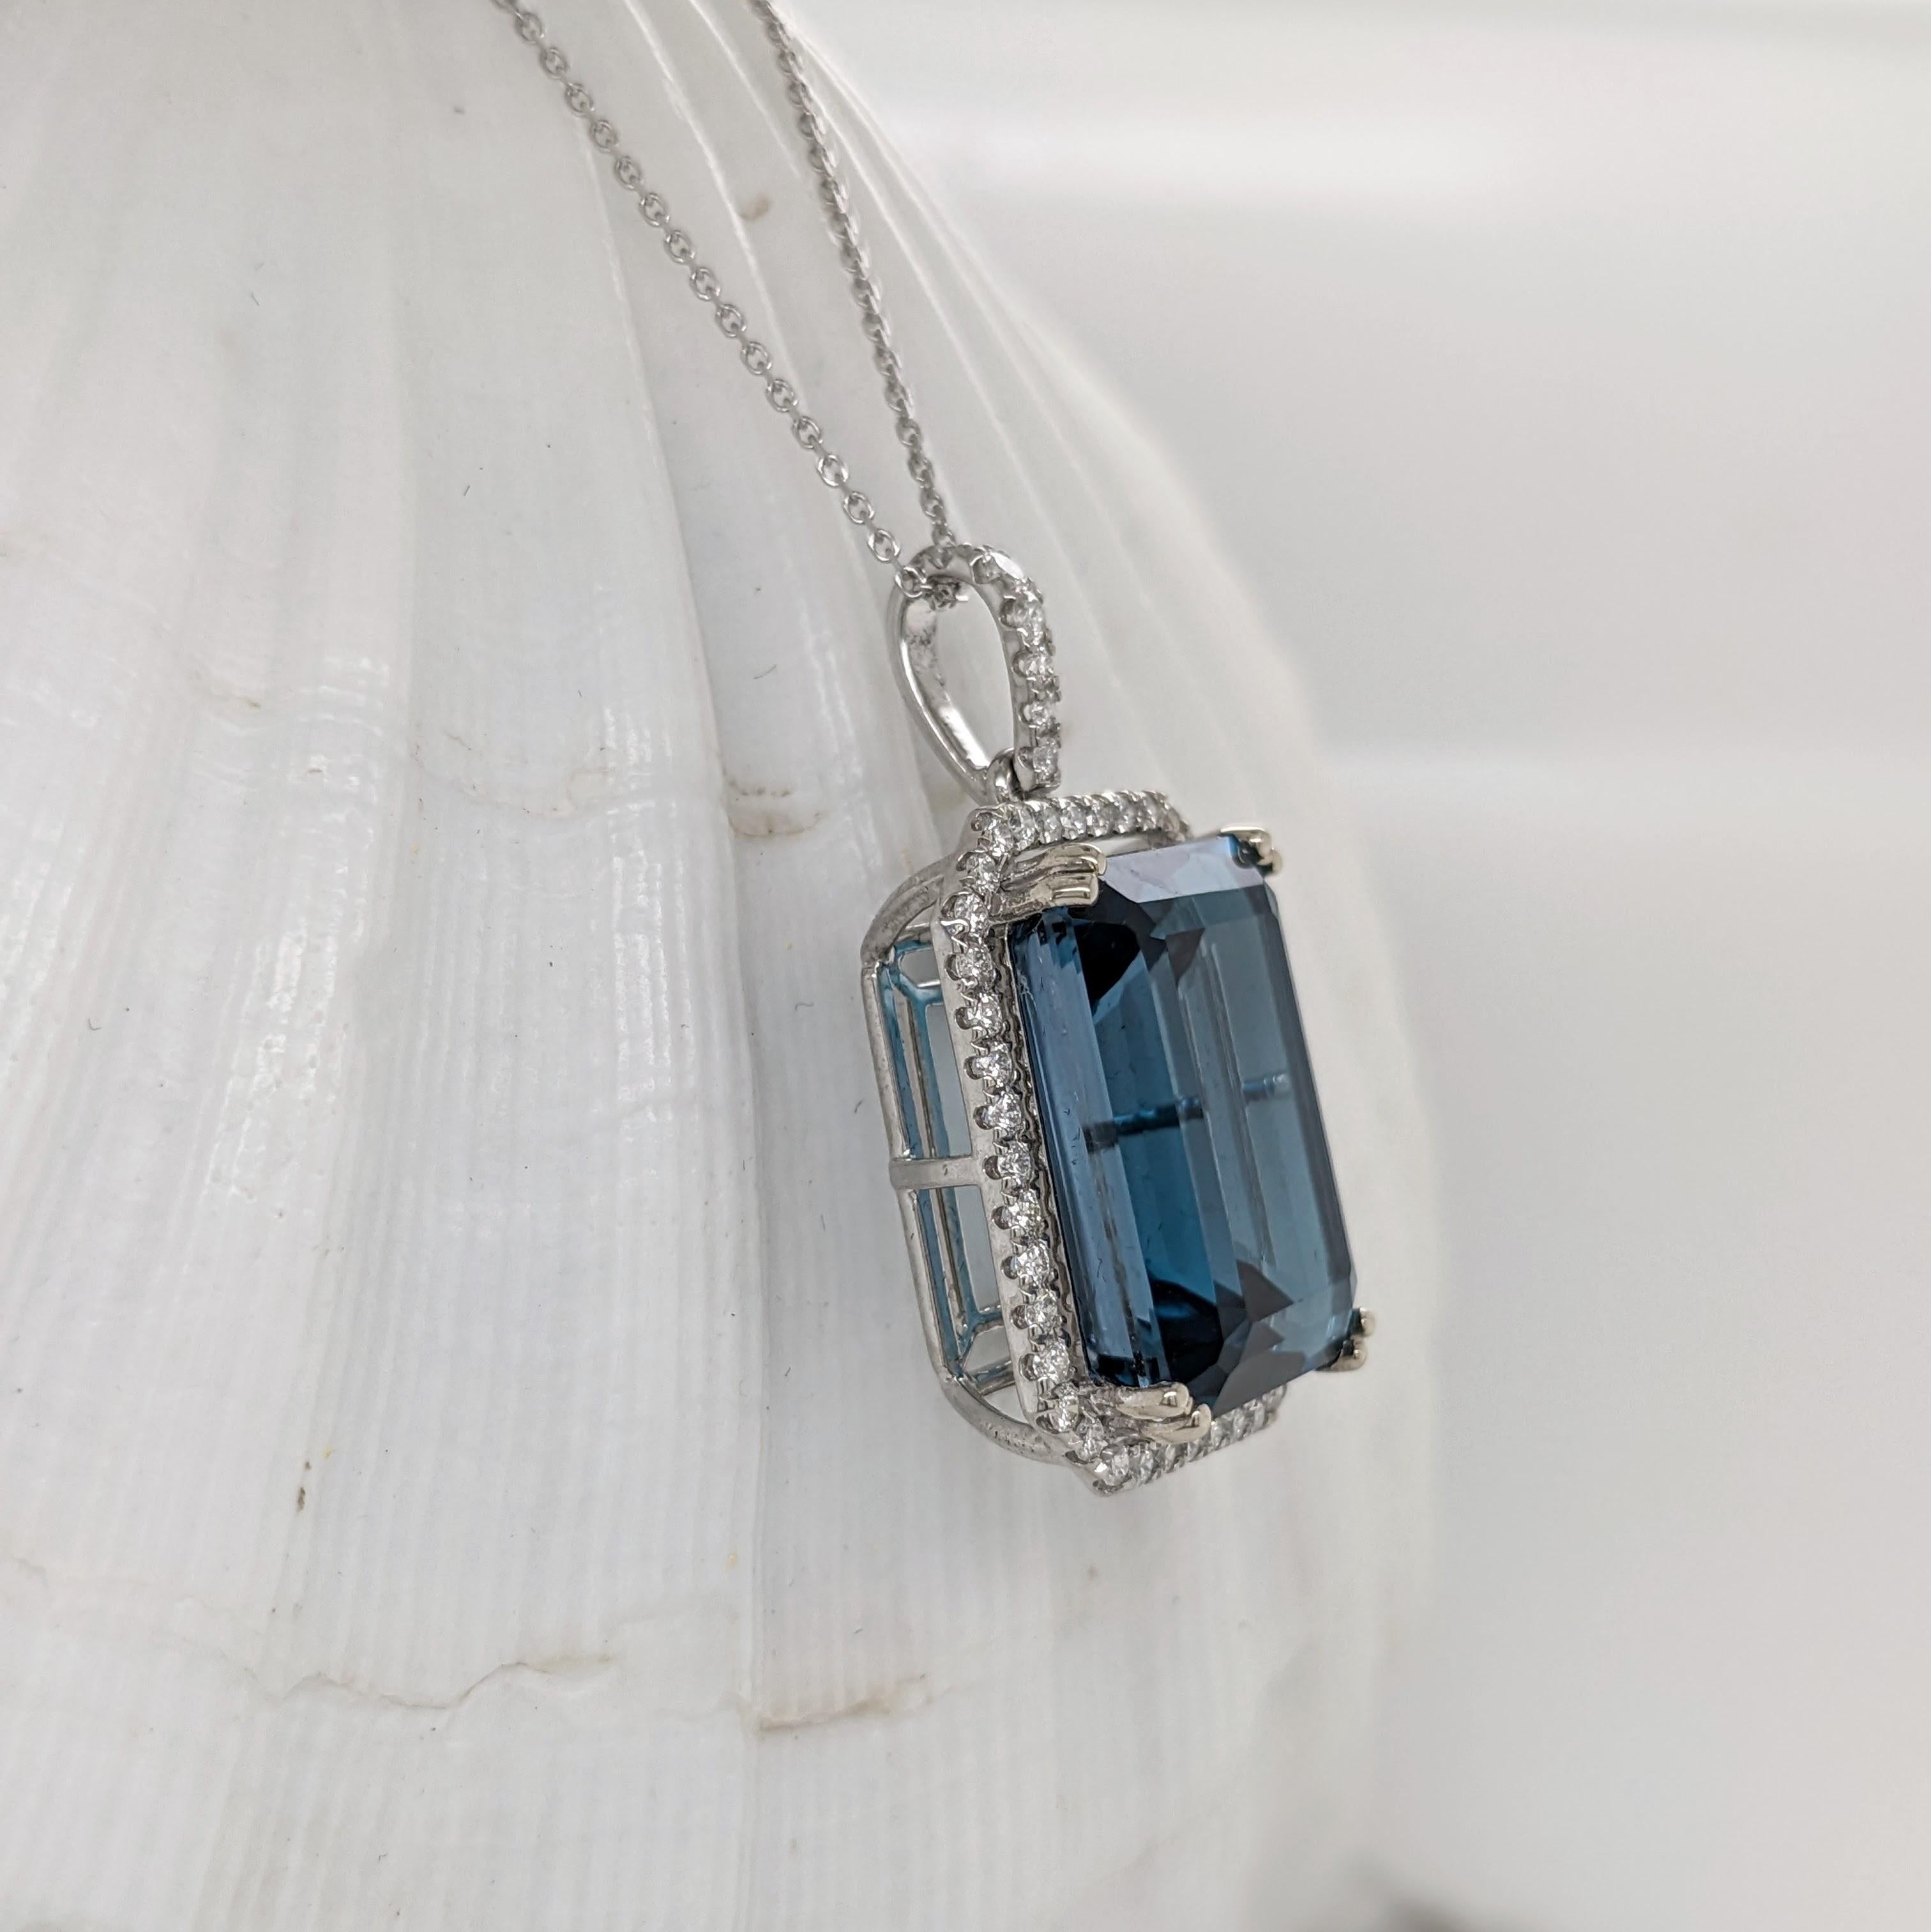 Emerald Cut 21ct London Topaz Pendant w Earth Mined Diamonds in Solid 14K Gold EM 18x13mm For Sale